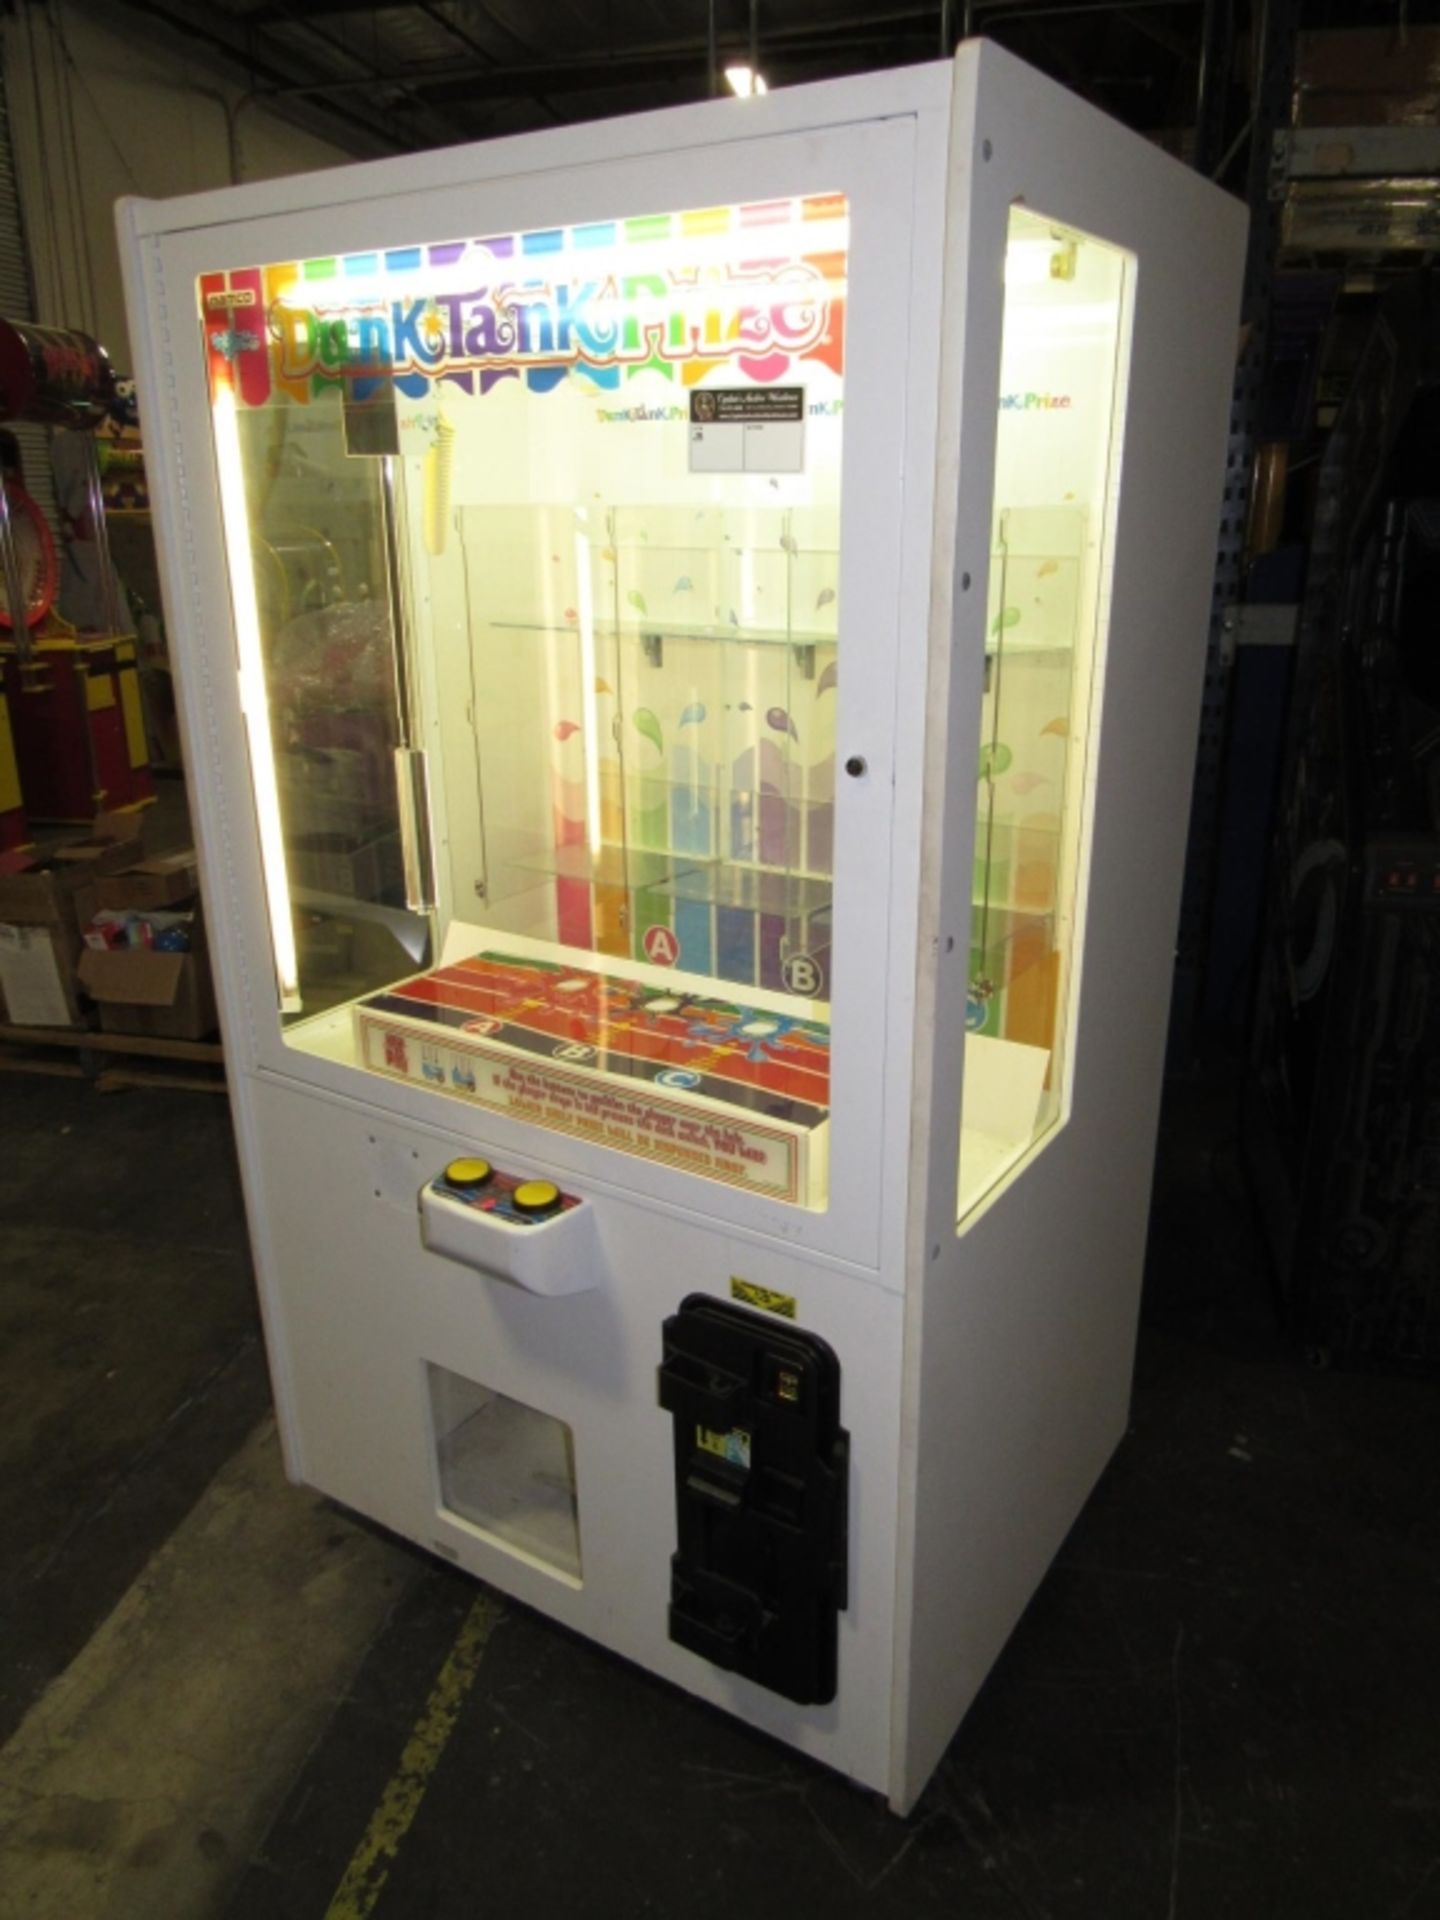 DUNK TANK INSTANT PRIZE REDEMPTION GAME NAMCO - Image 2 of 6